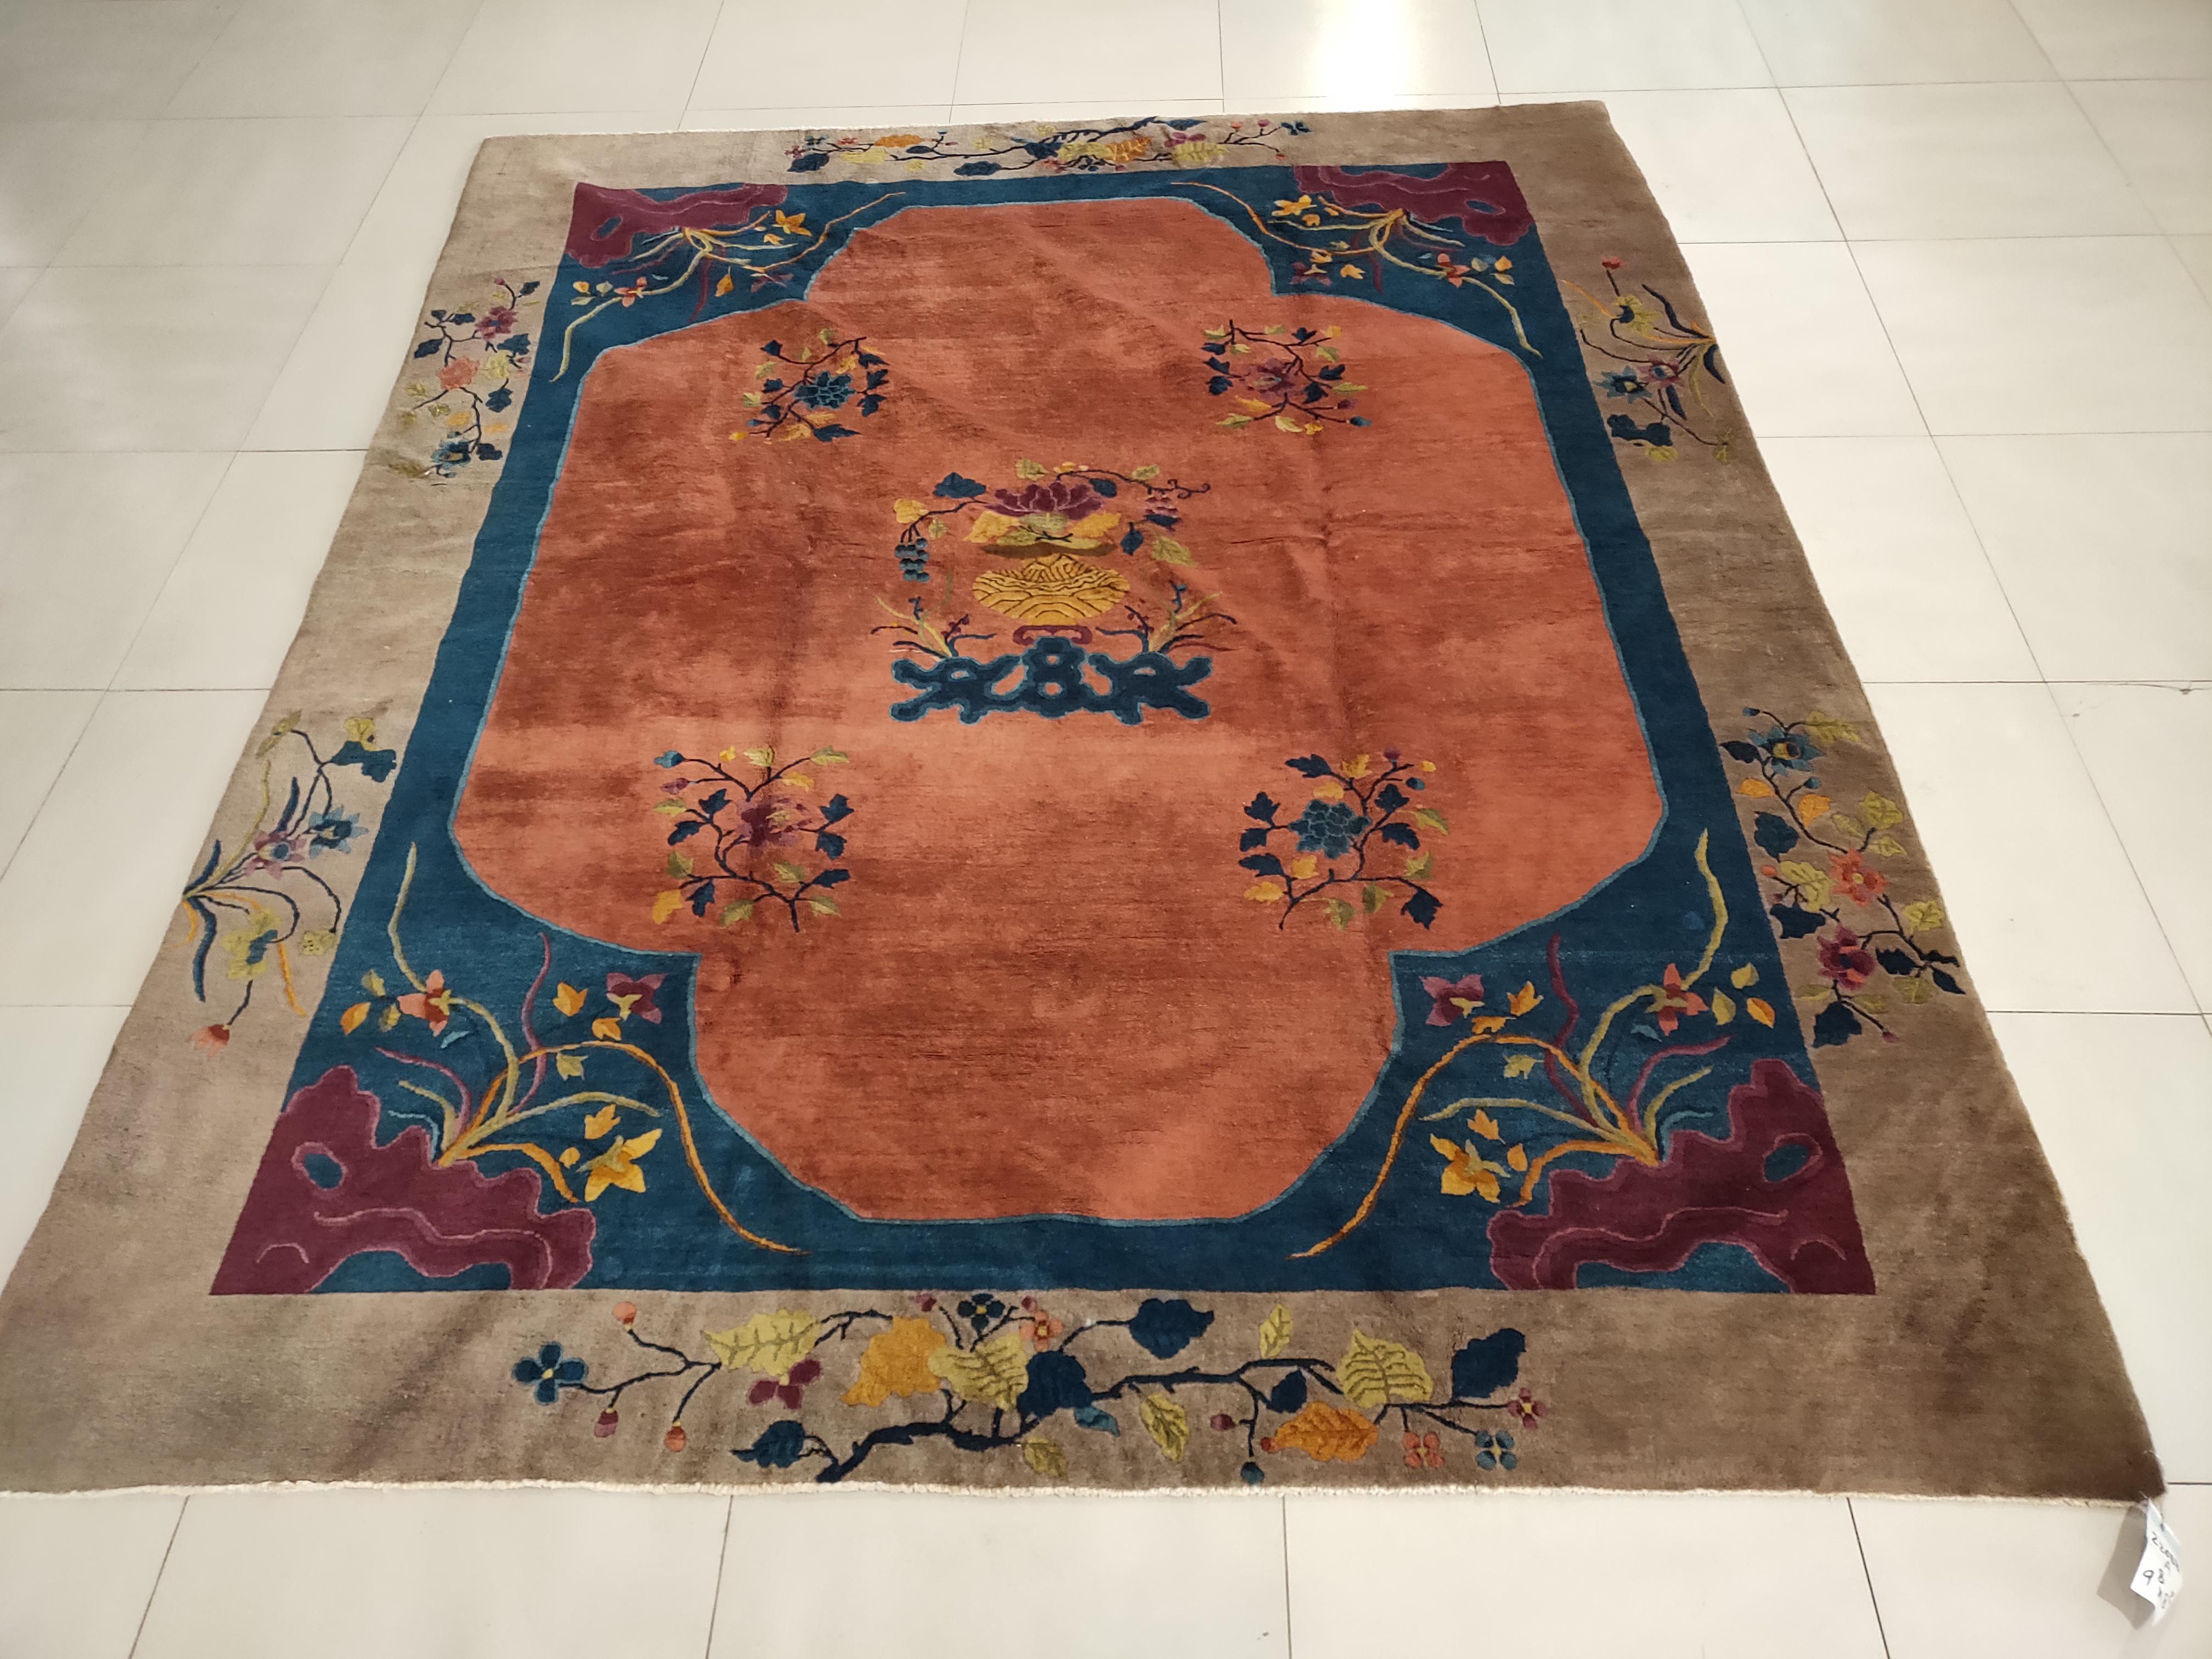 A four lobed, nearly open, apricot field is centered on a vase on stand with flowering bouquet, rocks and more flowers fill the blue corners of this 1920s Chinese carpet in the Art Deco style from Tianjin in northeast China.